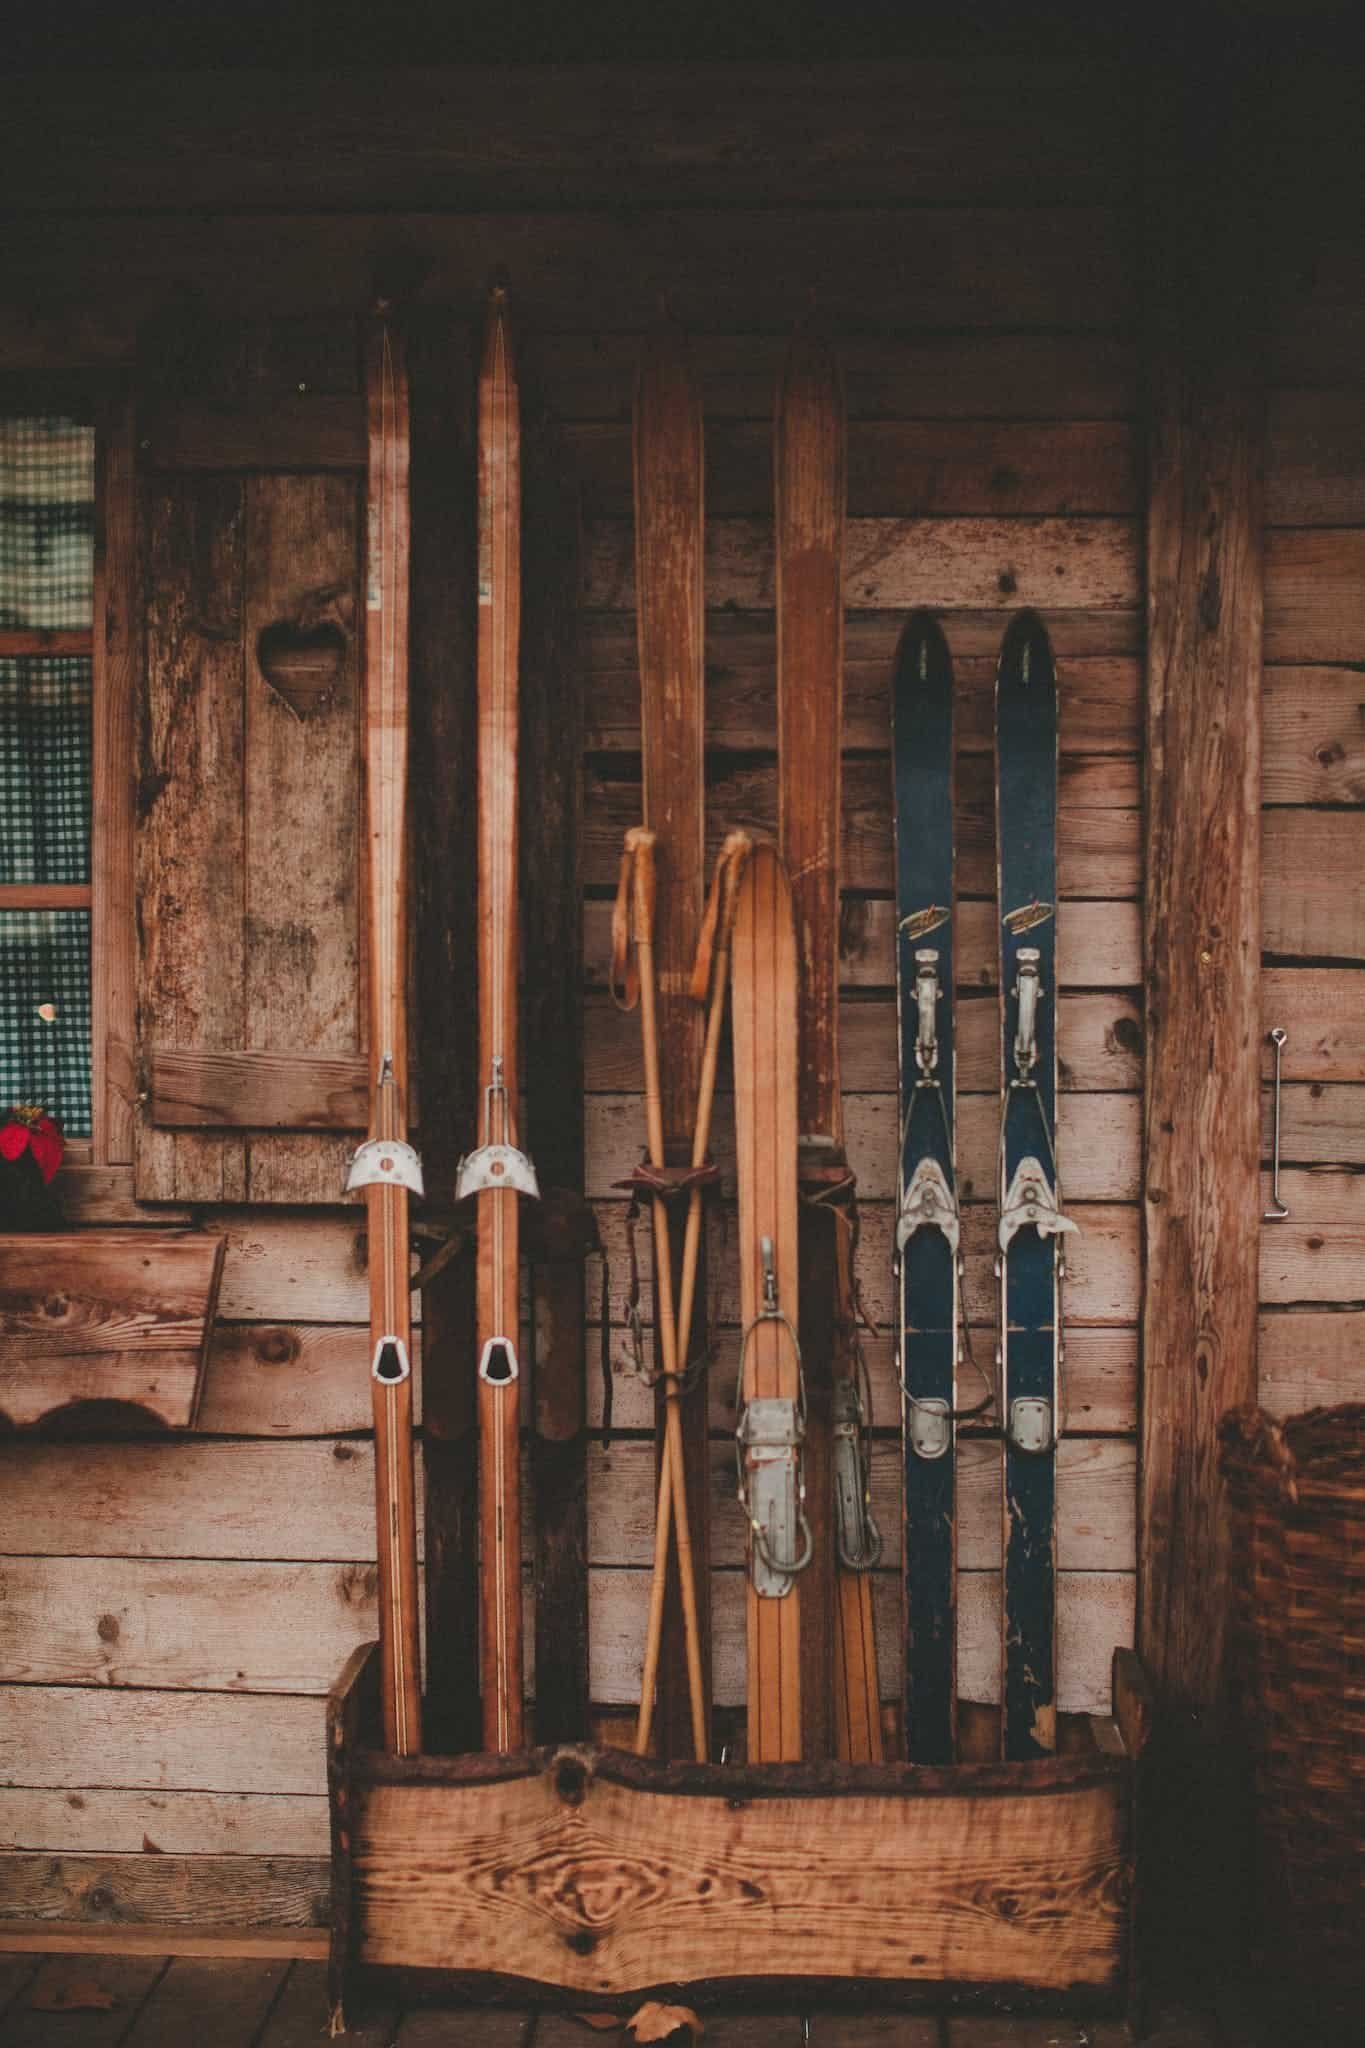 Photograph of Wooden Skis